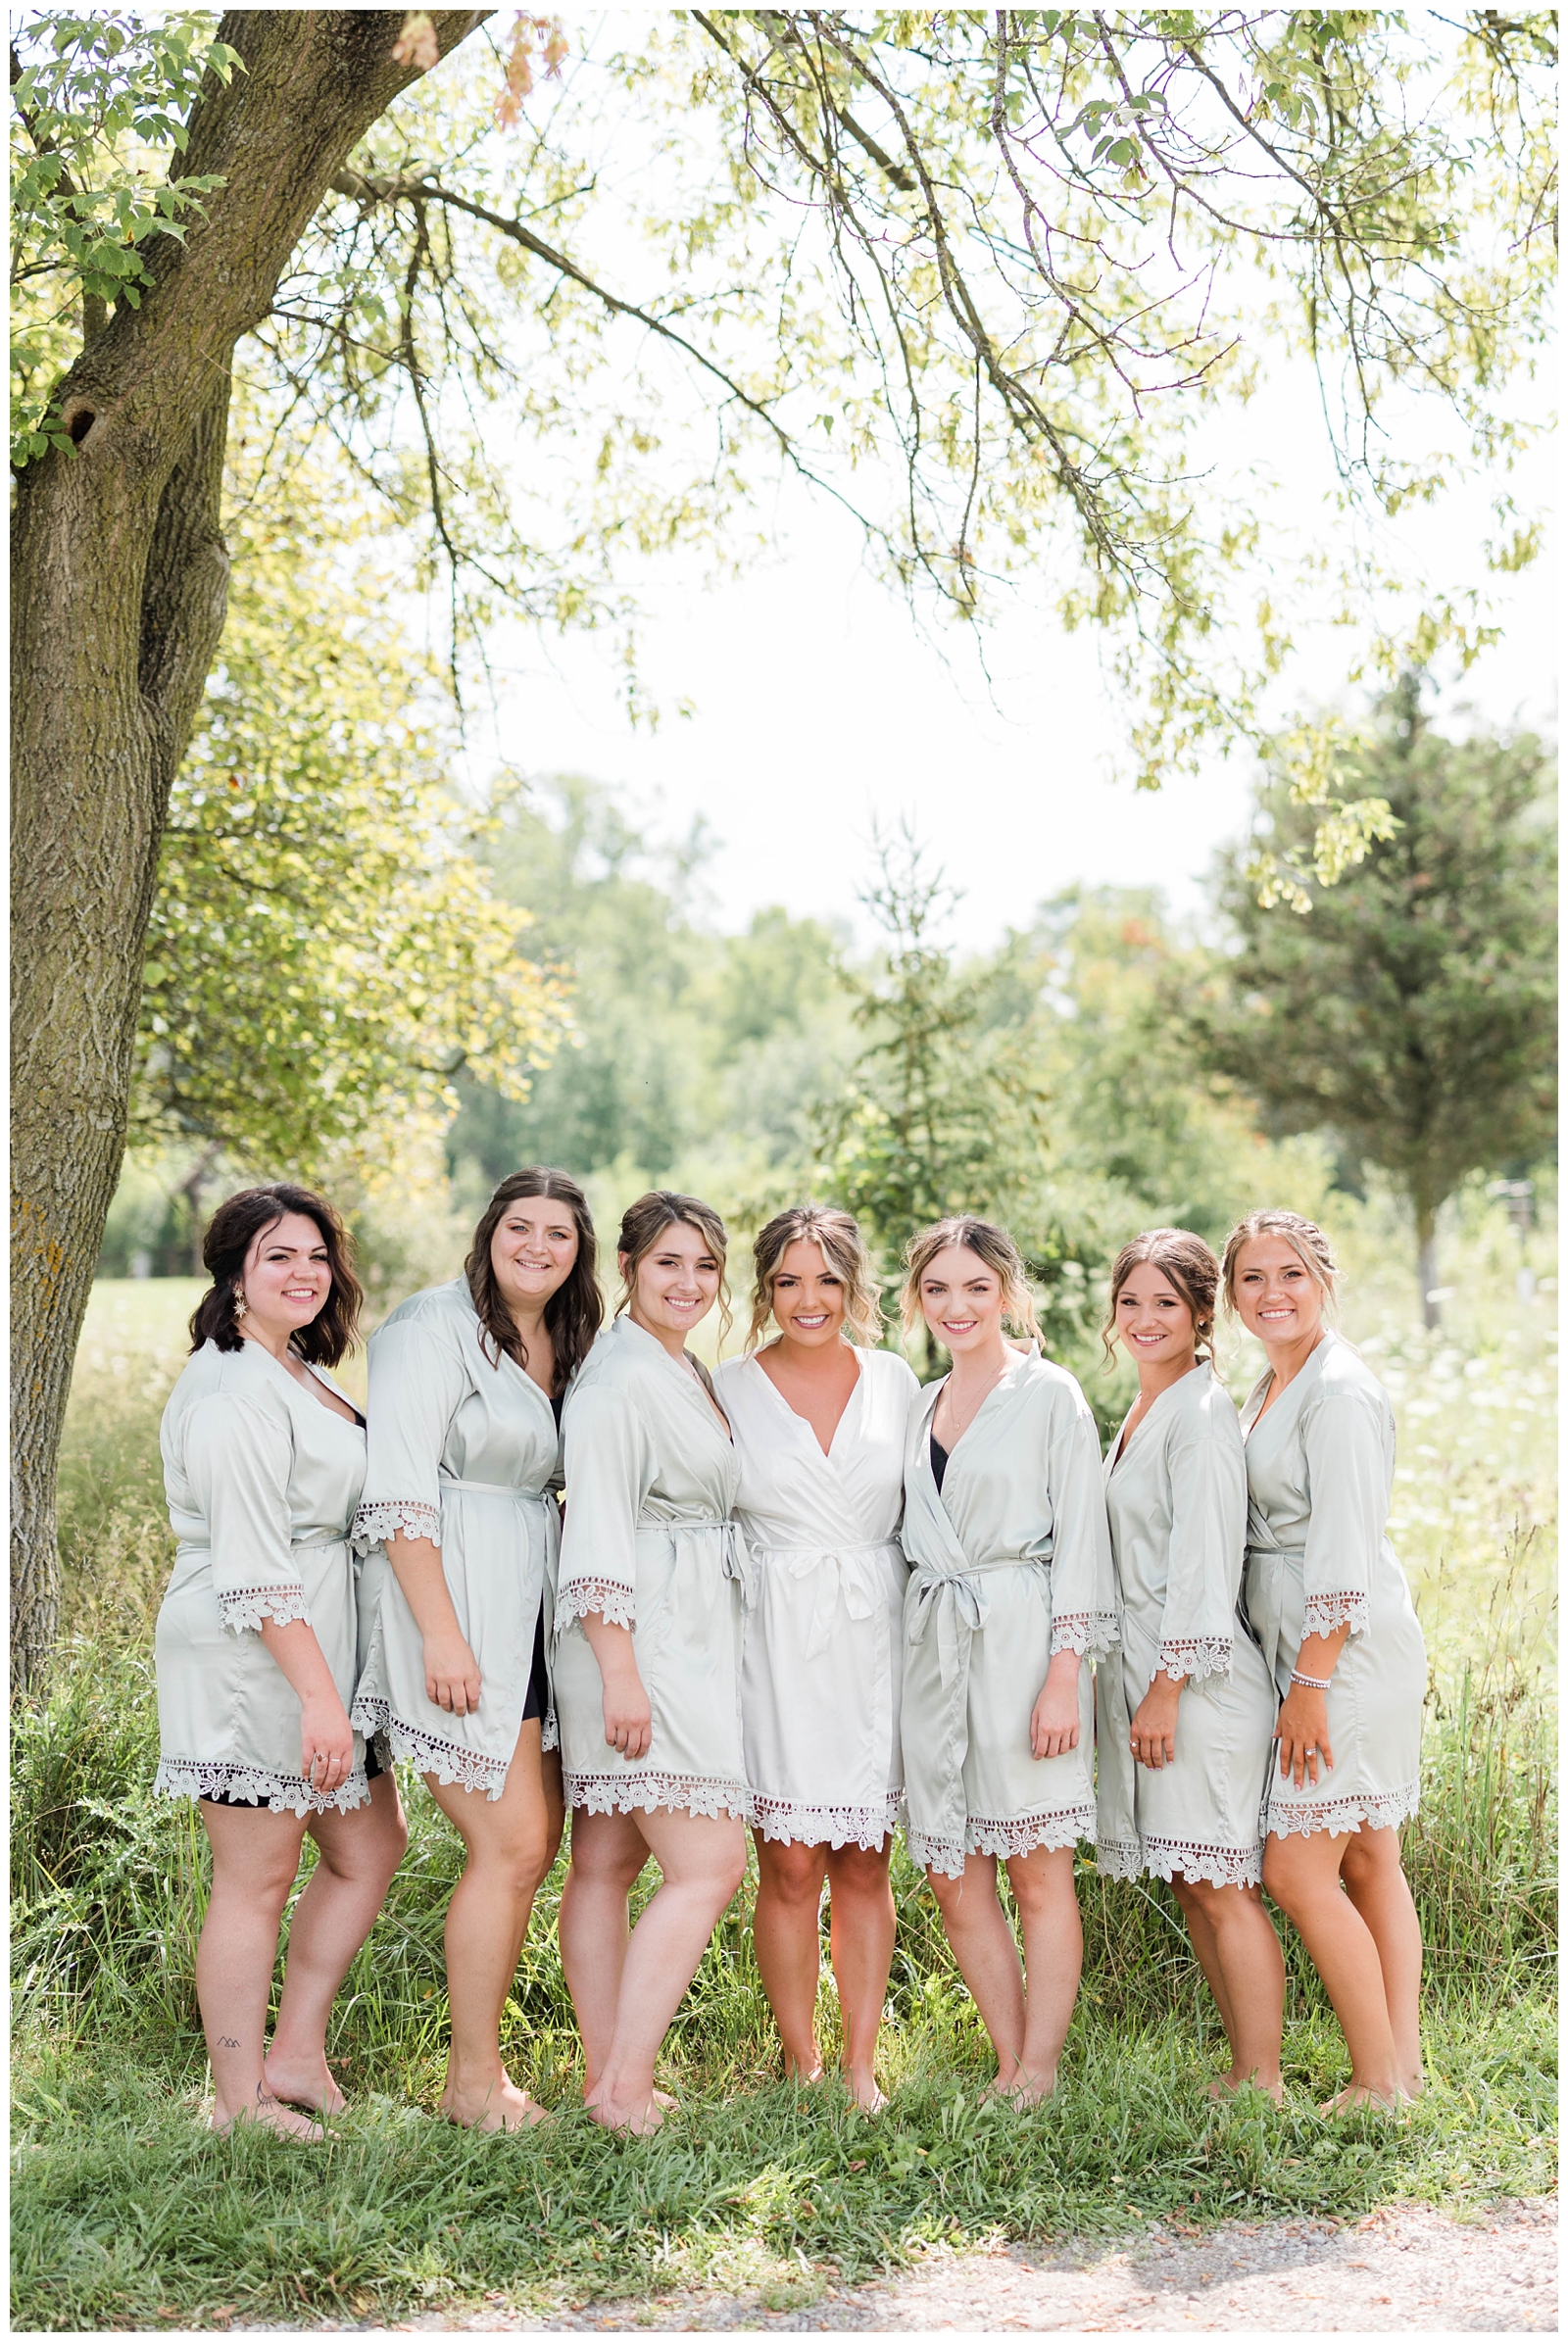 Bride and bridesmaids wearing getting ready robes